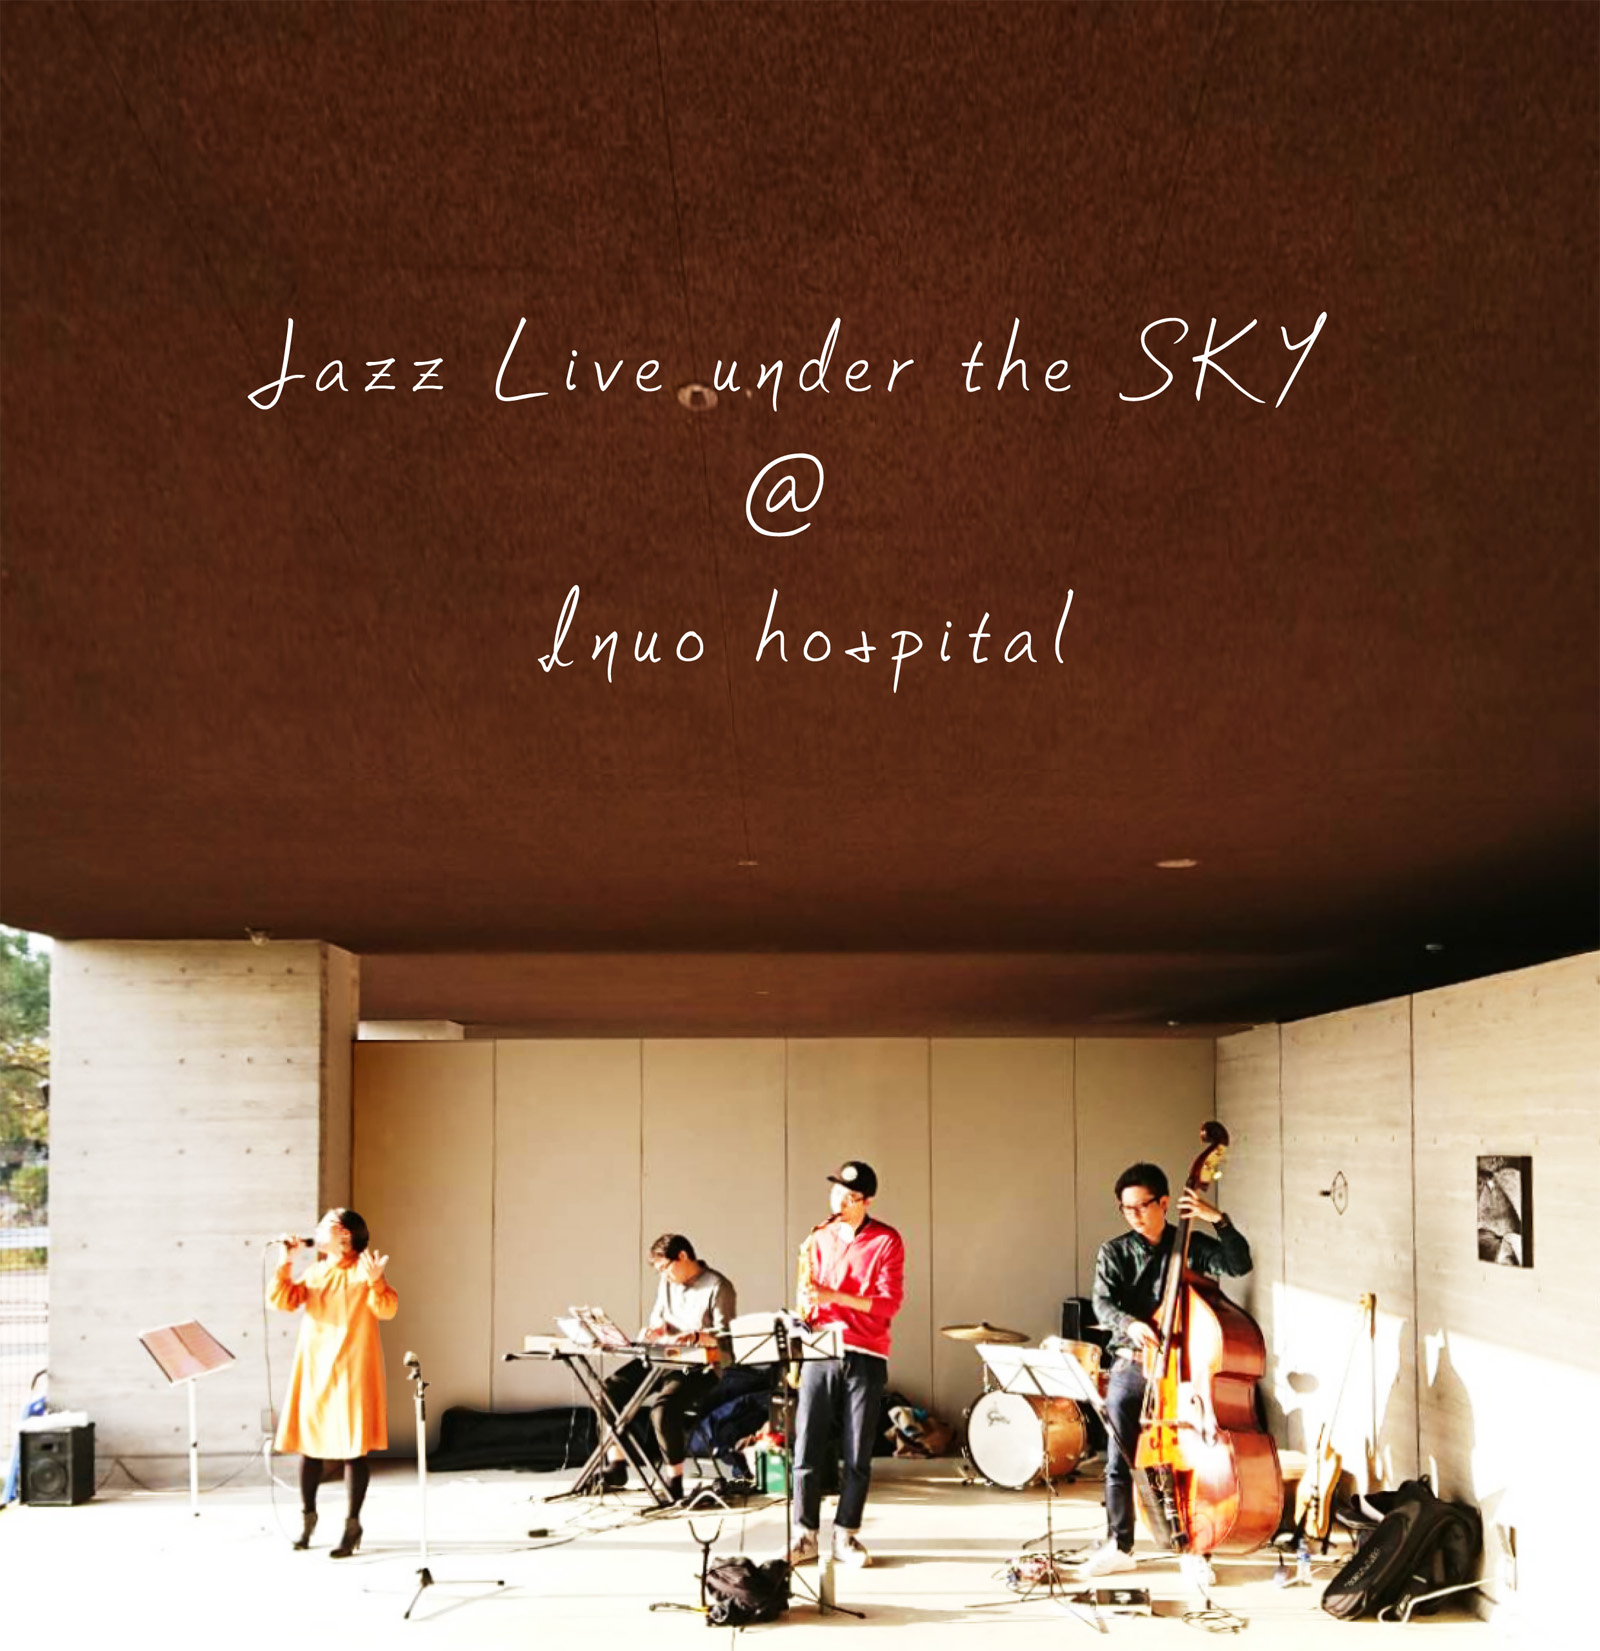 Jazz Live under the SKY @ Inuo hospitalの様子